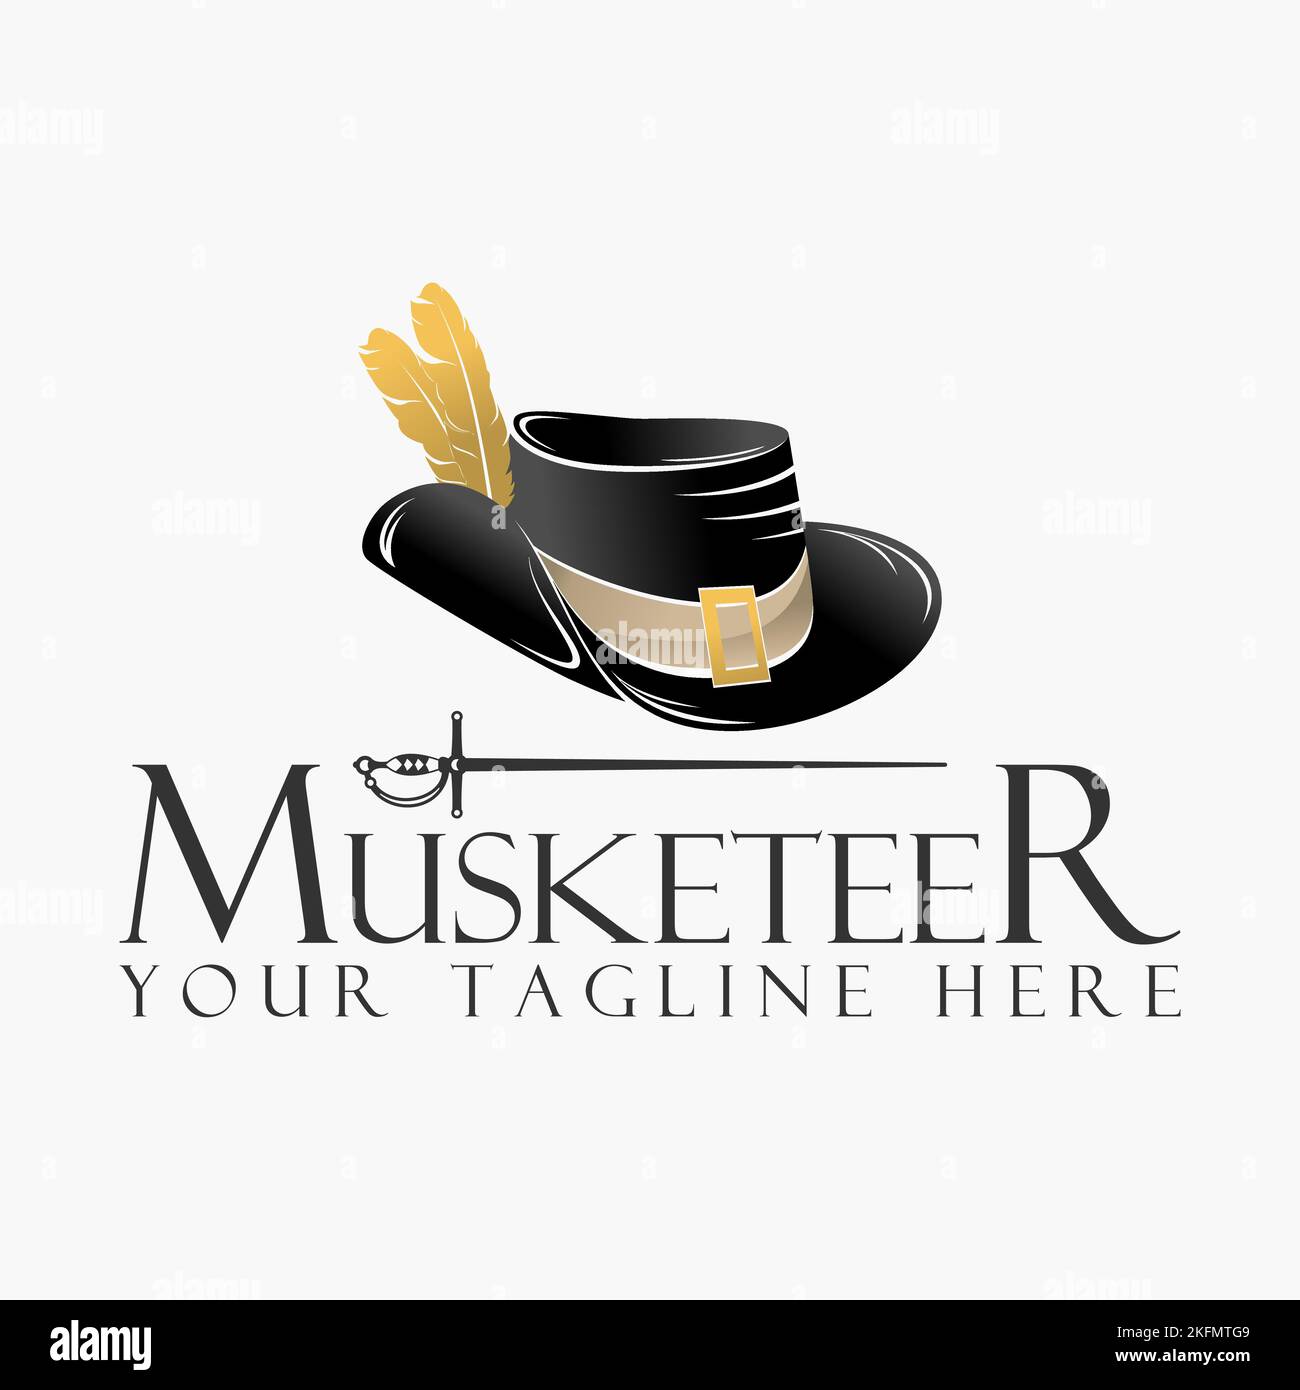 Musketeer hat with fur and sword image graphic icon logo design abstract concept vector stock. Can be used as a symbol related to cowboy or army Stock Vector